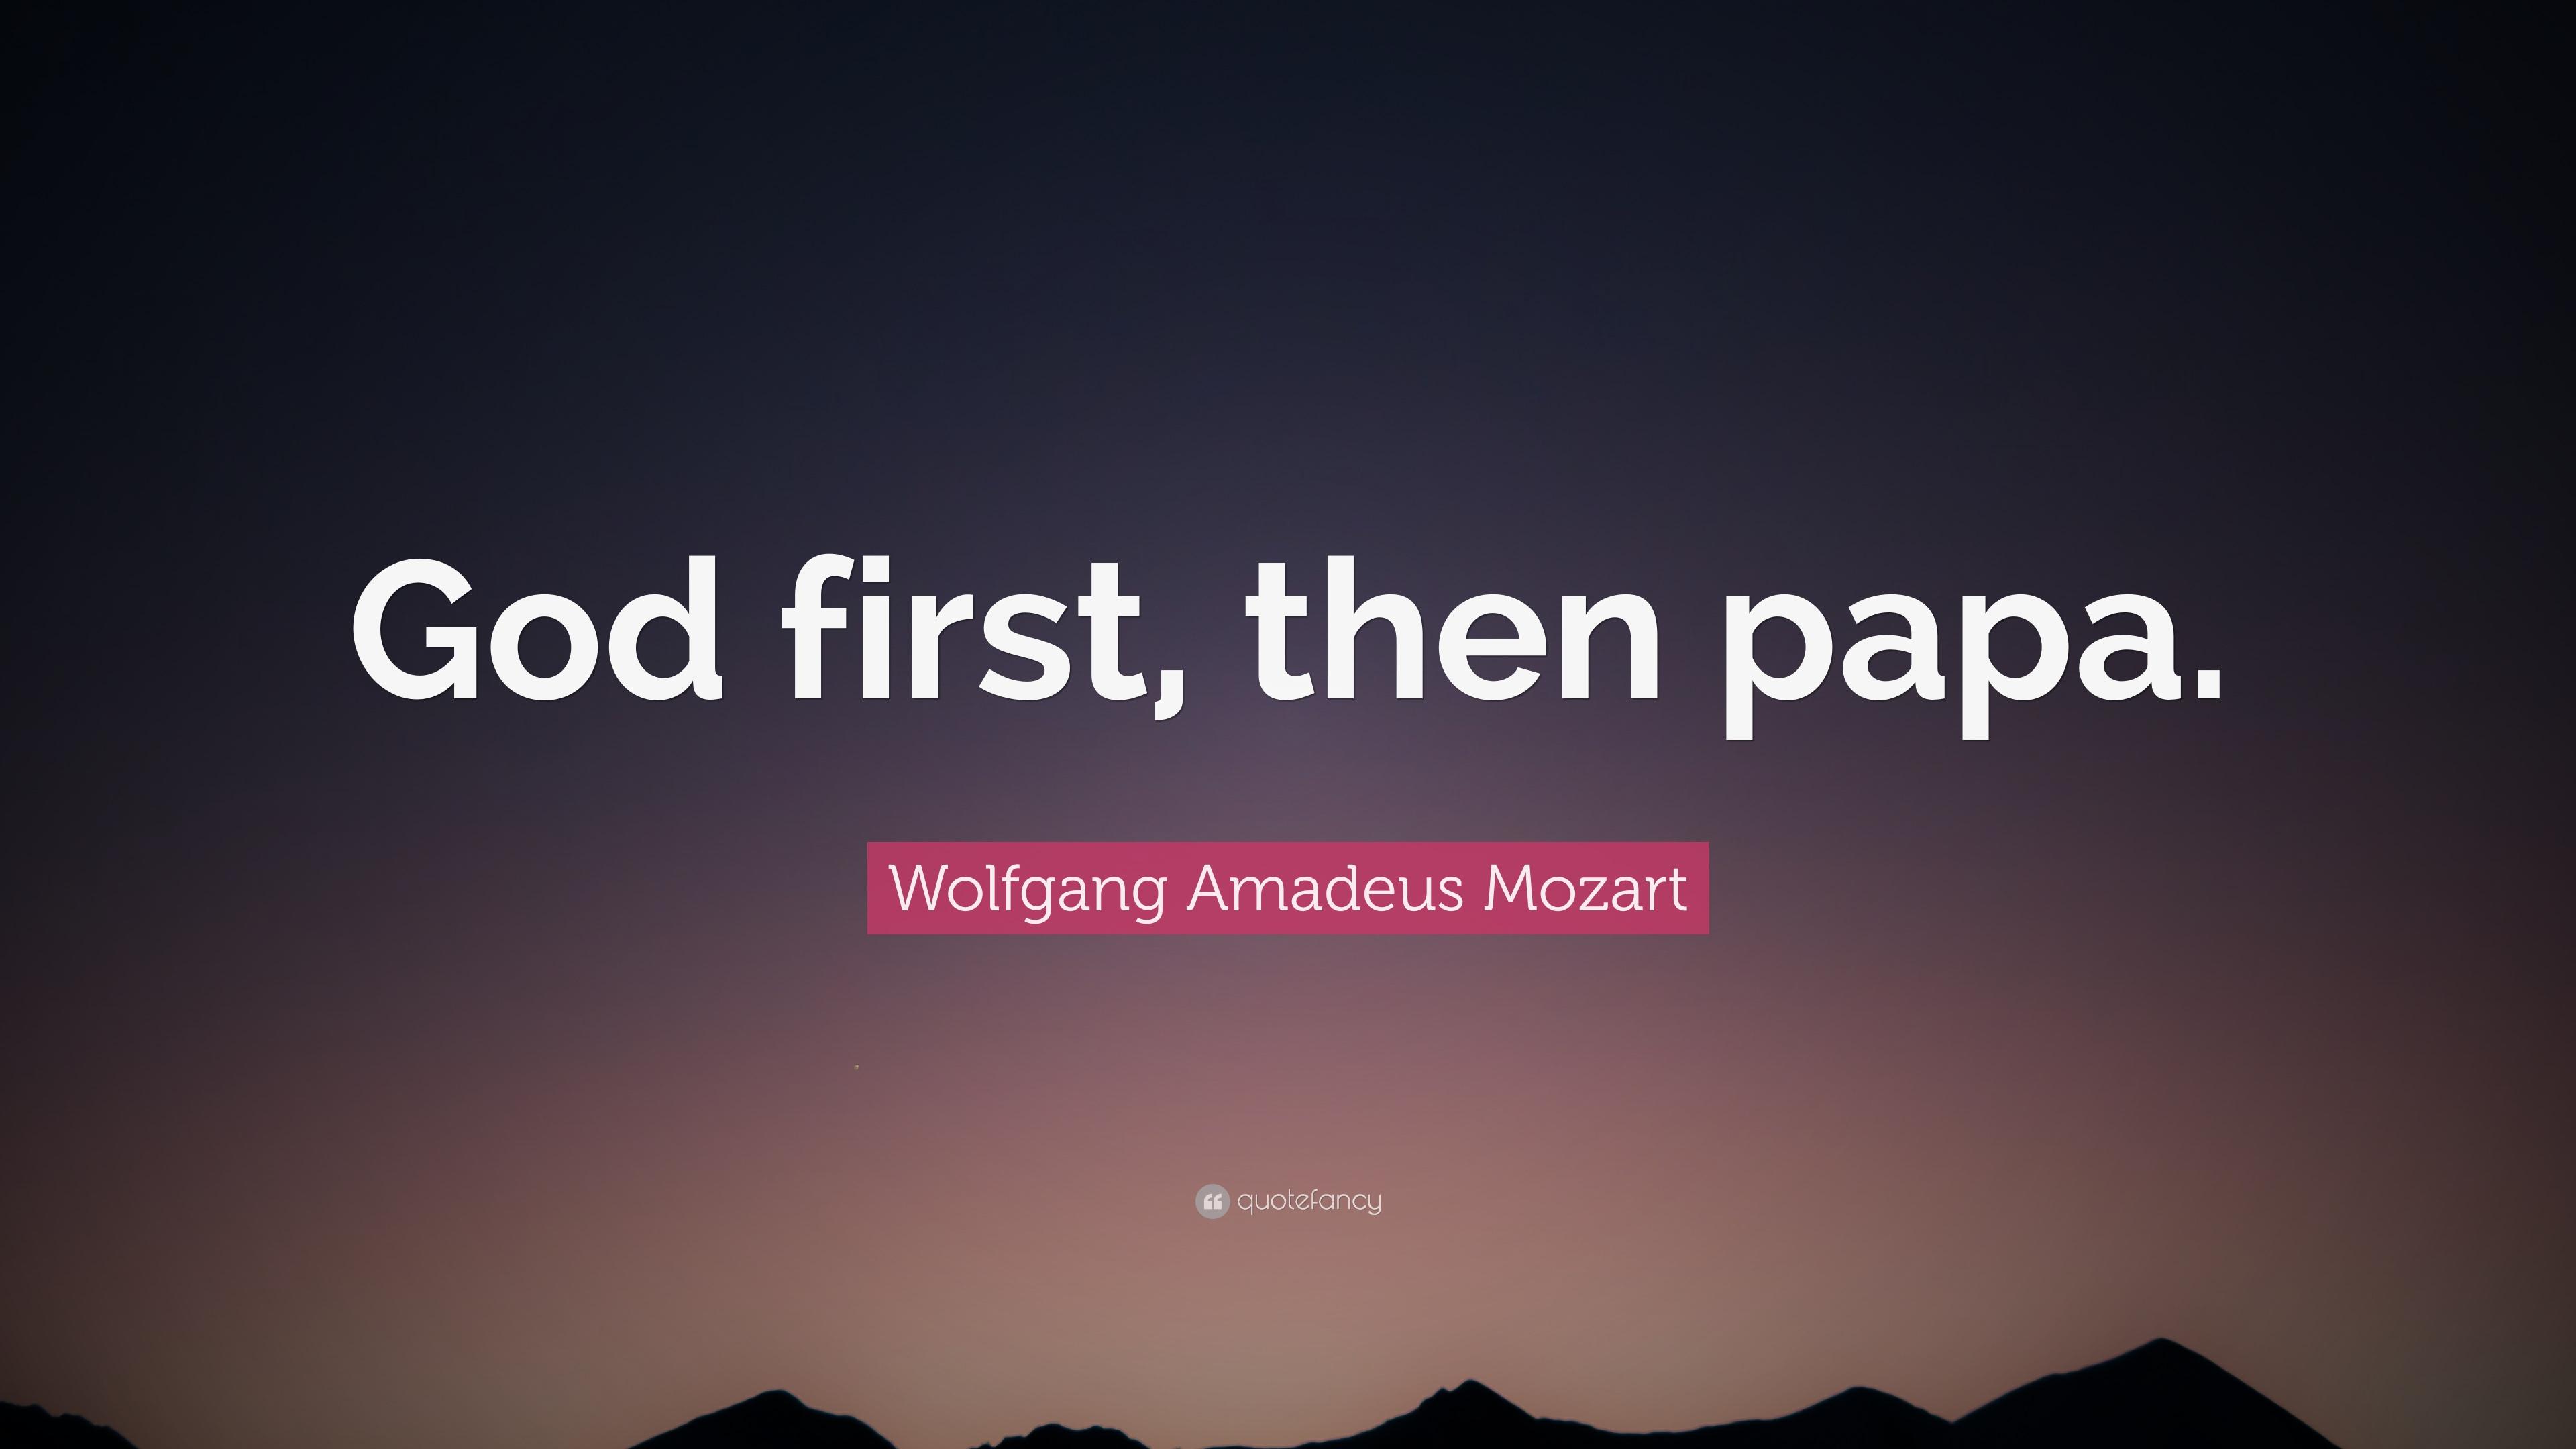 Wolfgang Amadeus Mozart Quote: “God first, then papa.” 10